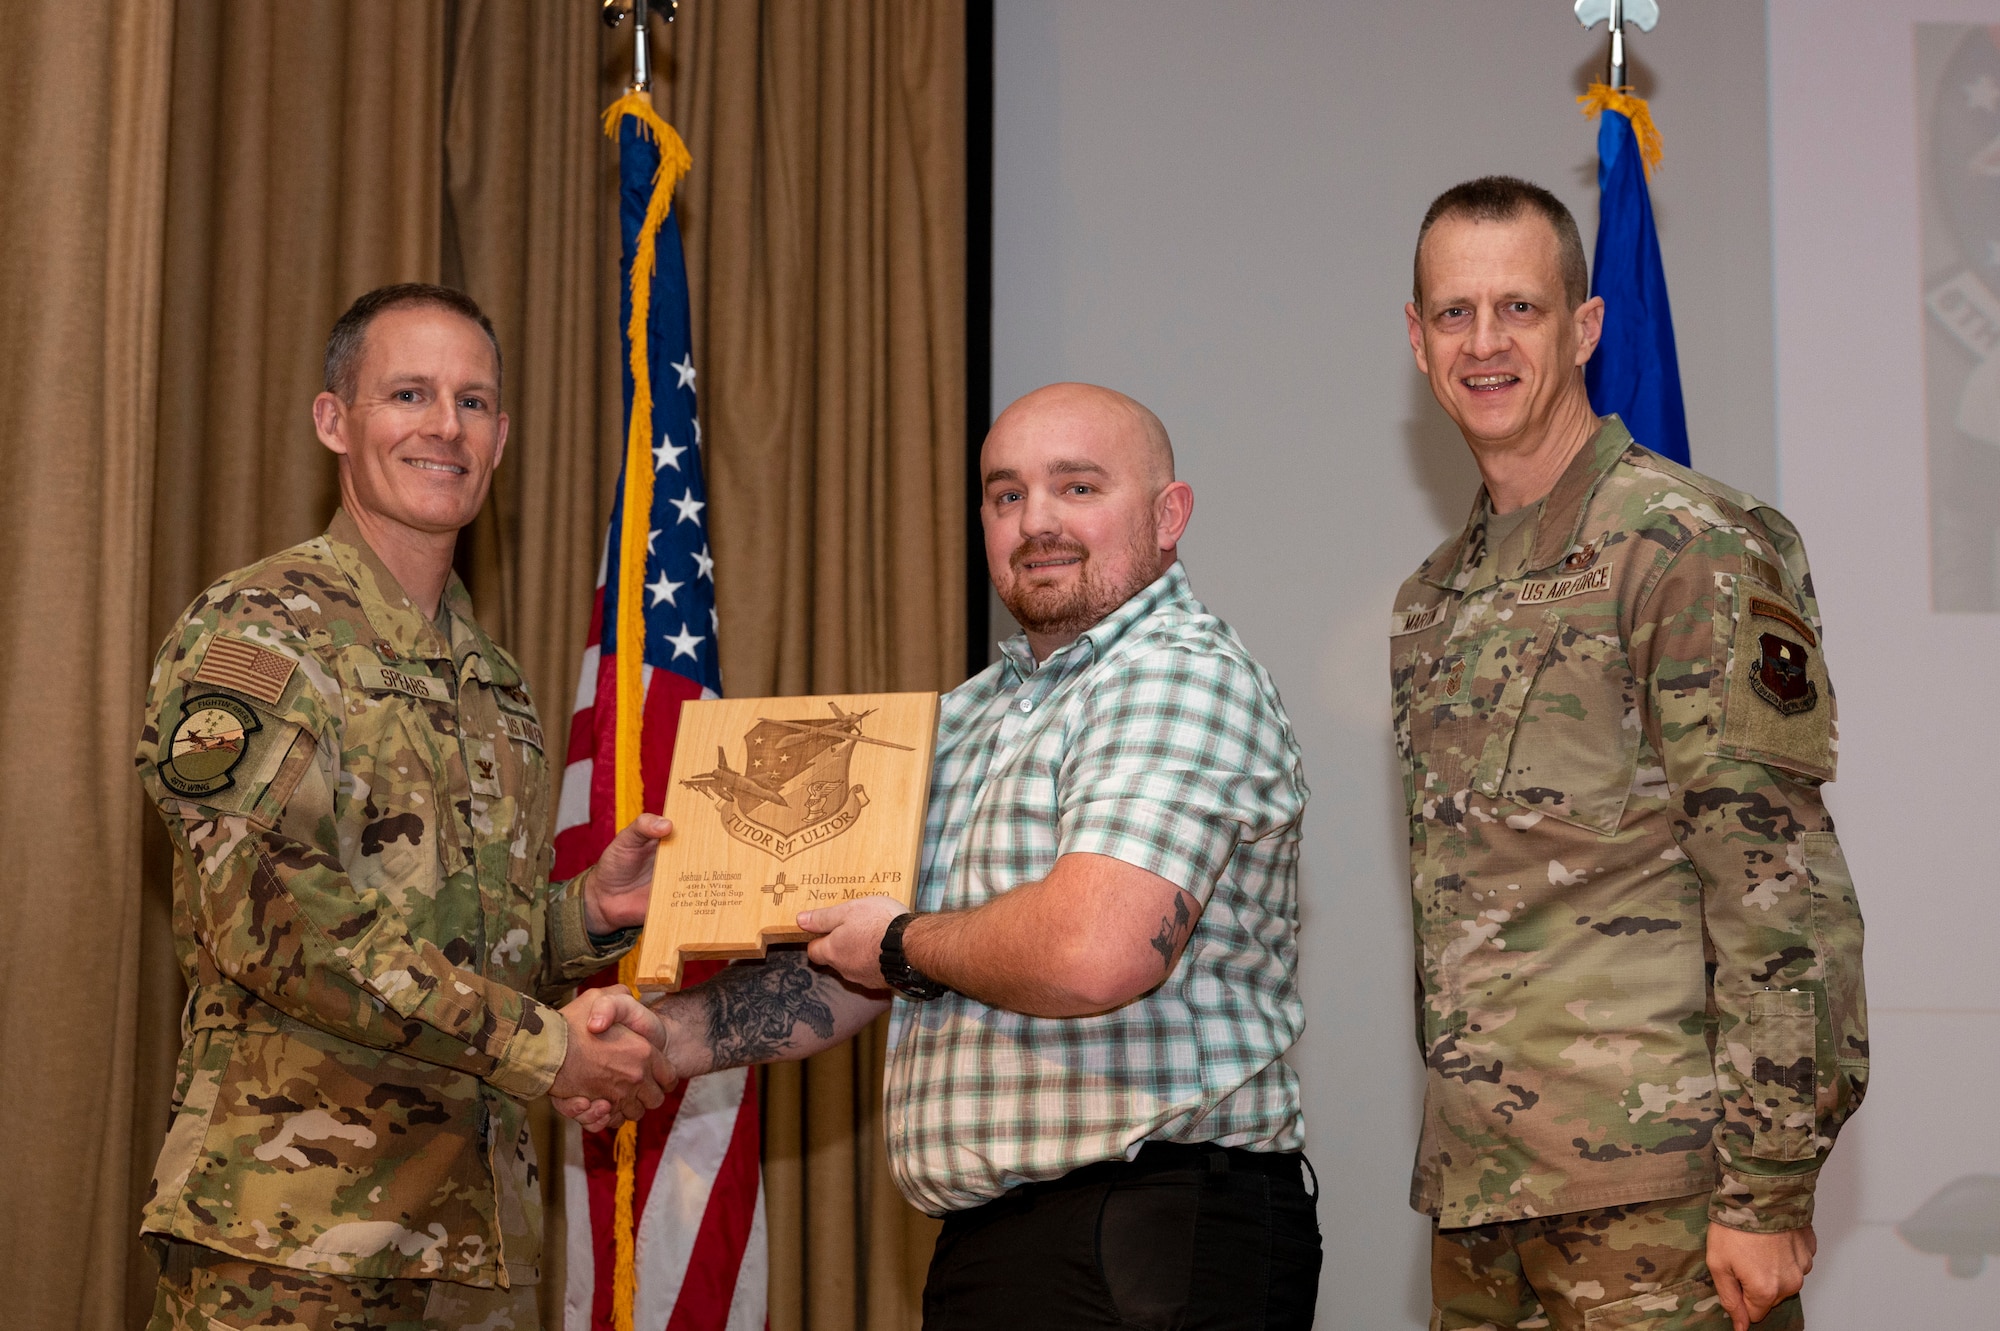 Joshua Robinson, from the 49th Equipment Maintenance Squadron, accepts the Civilian Category I (Non-supervisory) of the Quarter Award, during the 49th Wing’s 3rd Quarter Award ceremony at Holloman Air Force Base, New Mexico, Nov. 21, 2022.